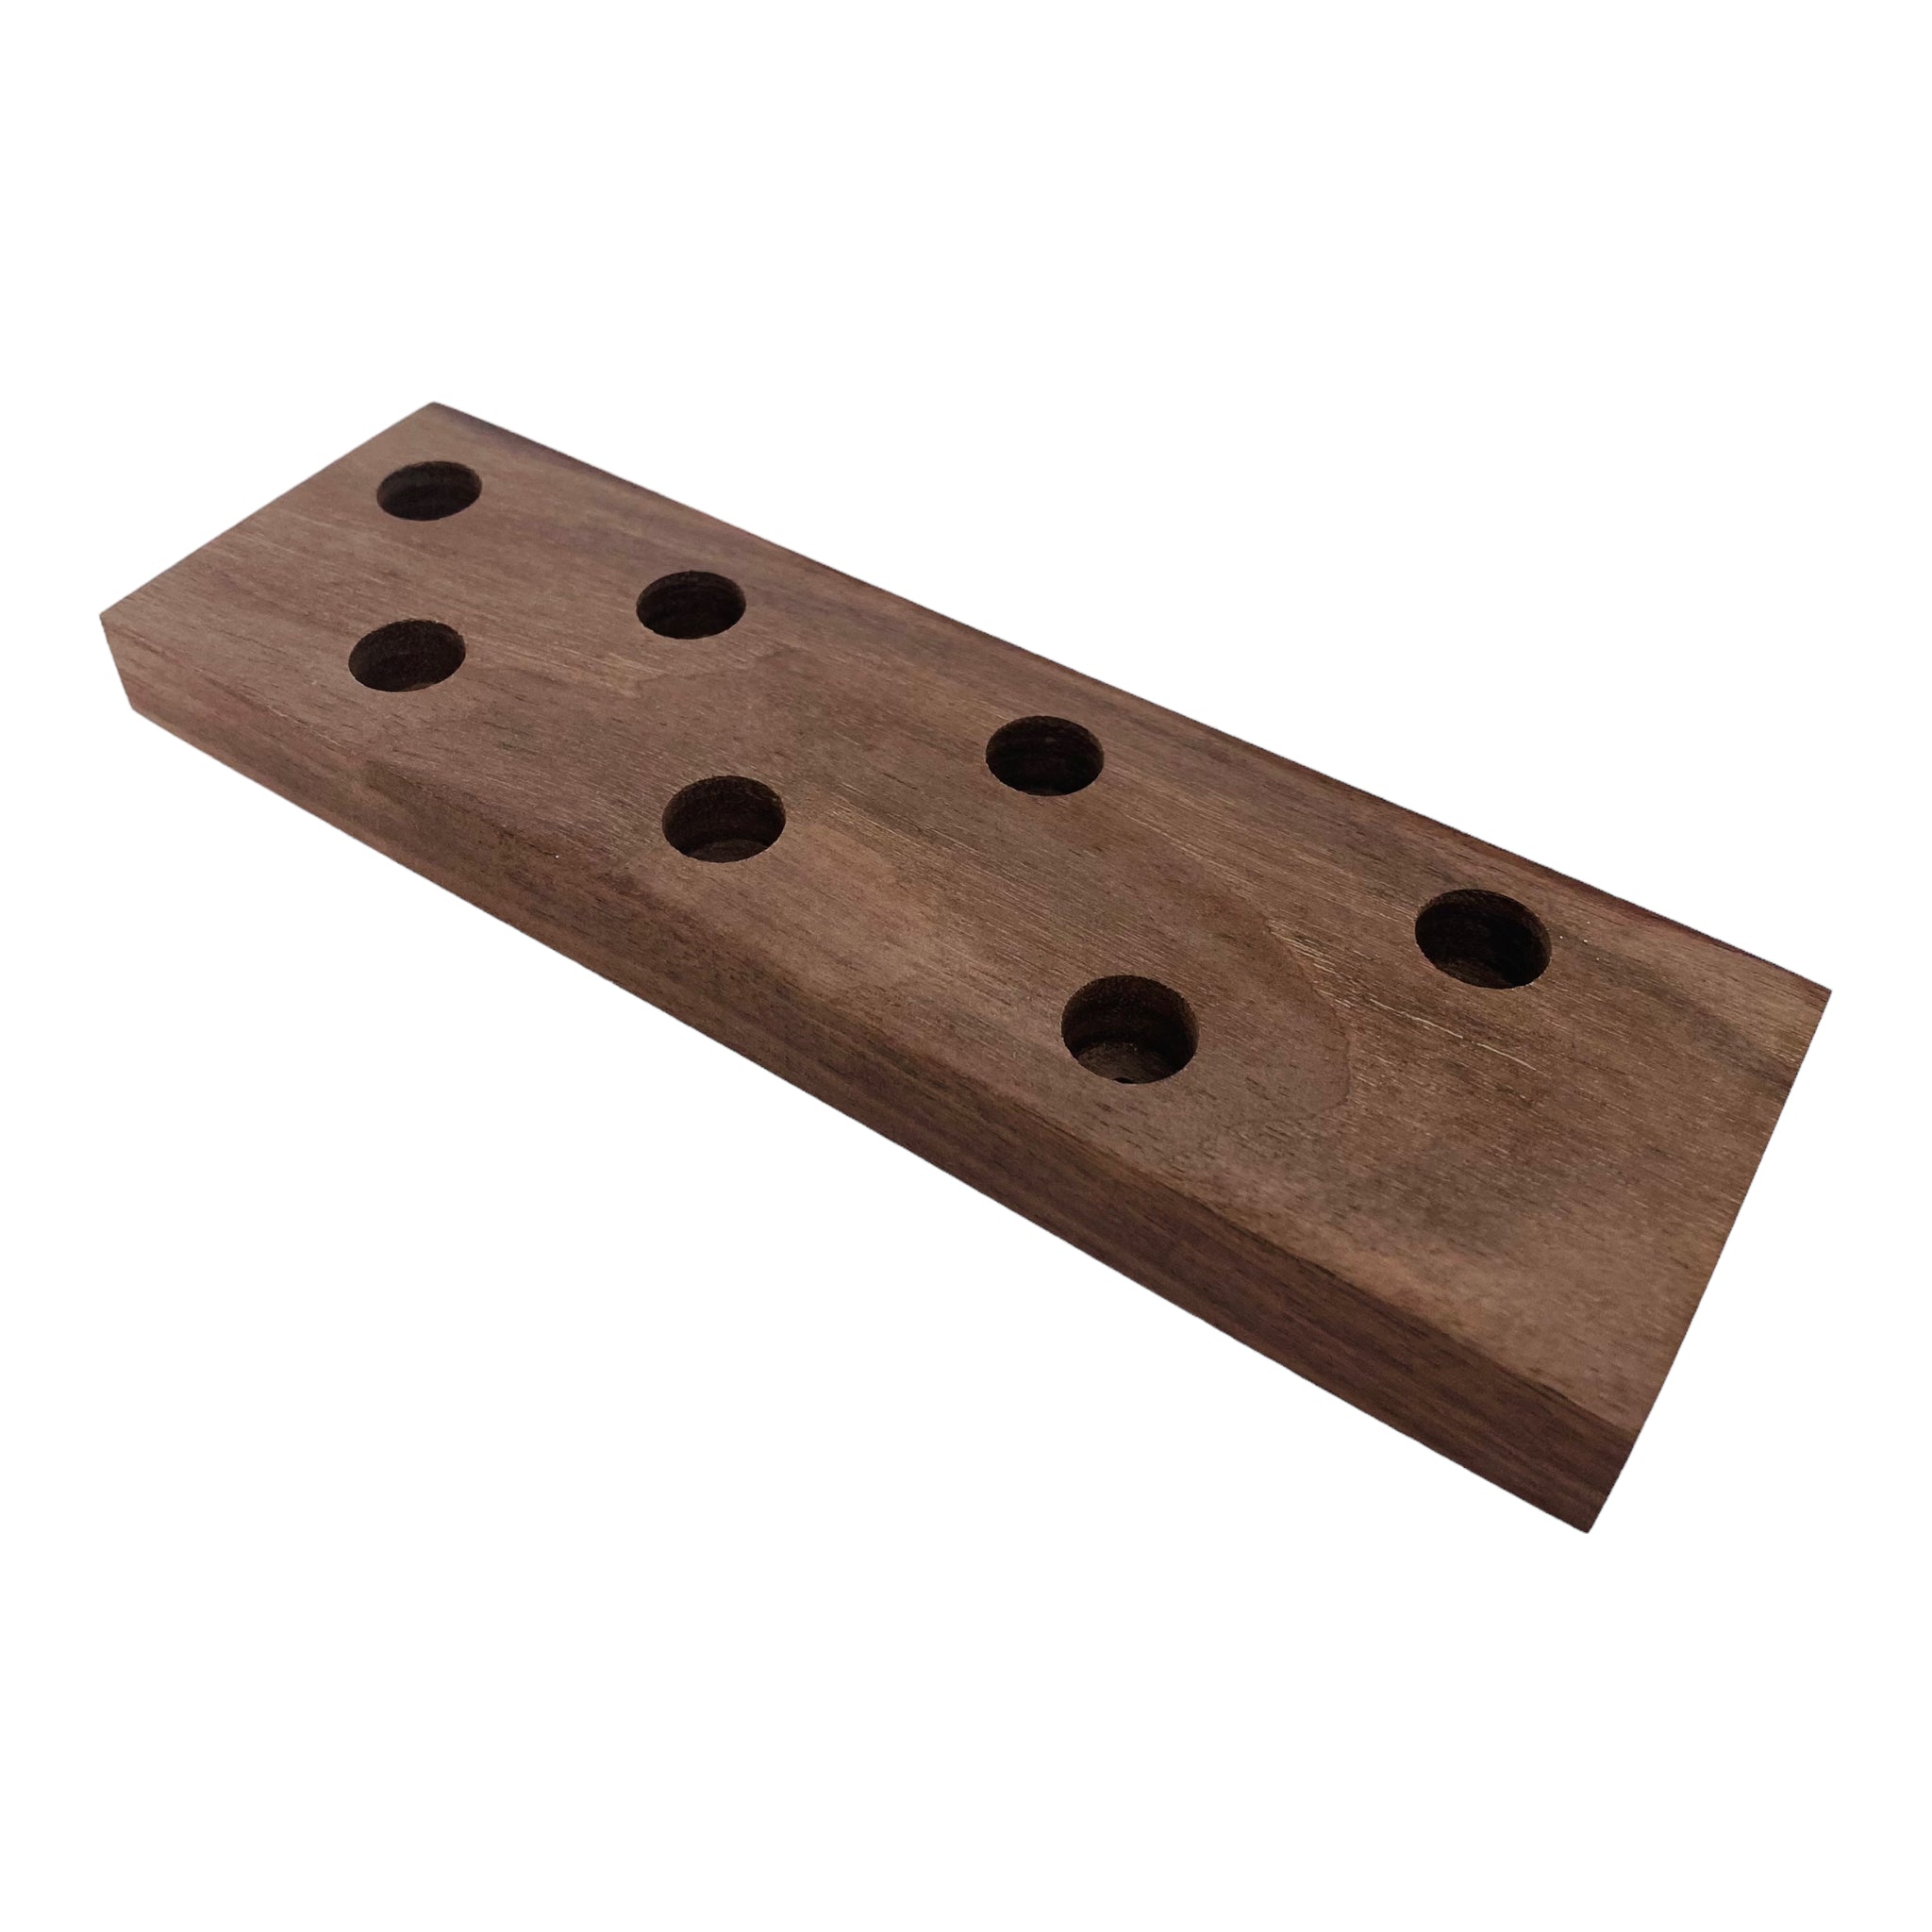 7 Hole Wood Display Stand Holder For 14mm Bong Bowl Pieces Or Quartz Bangers - Black Walnut